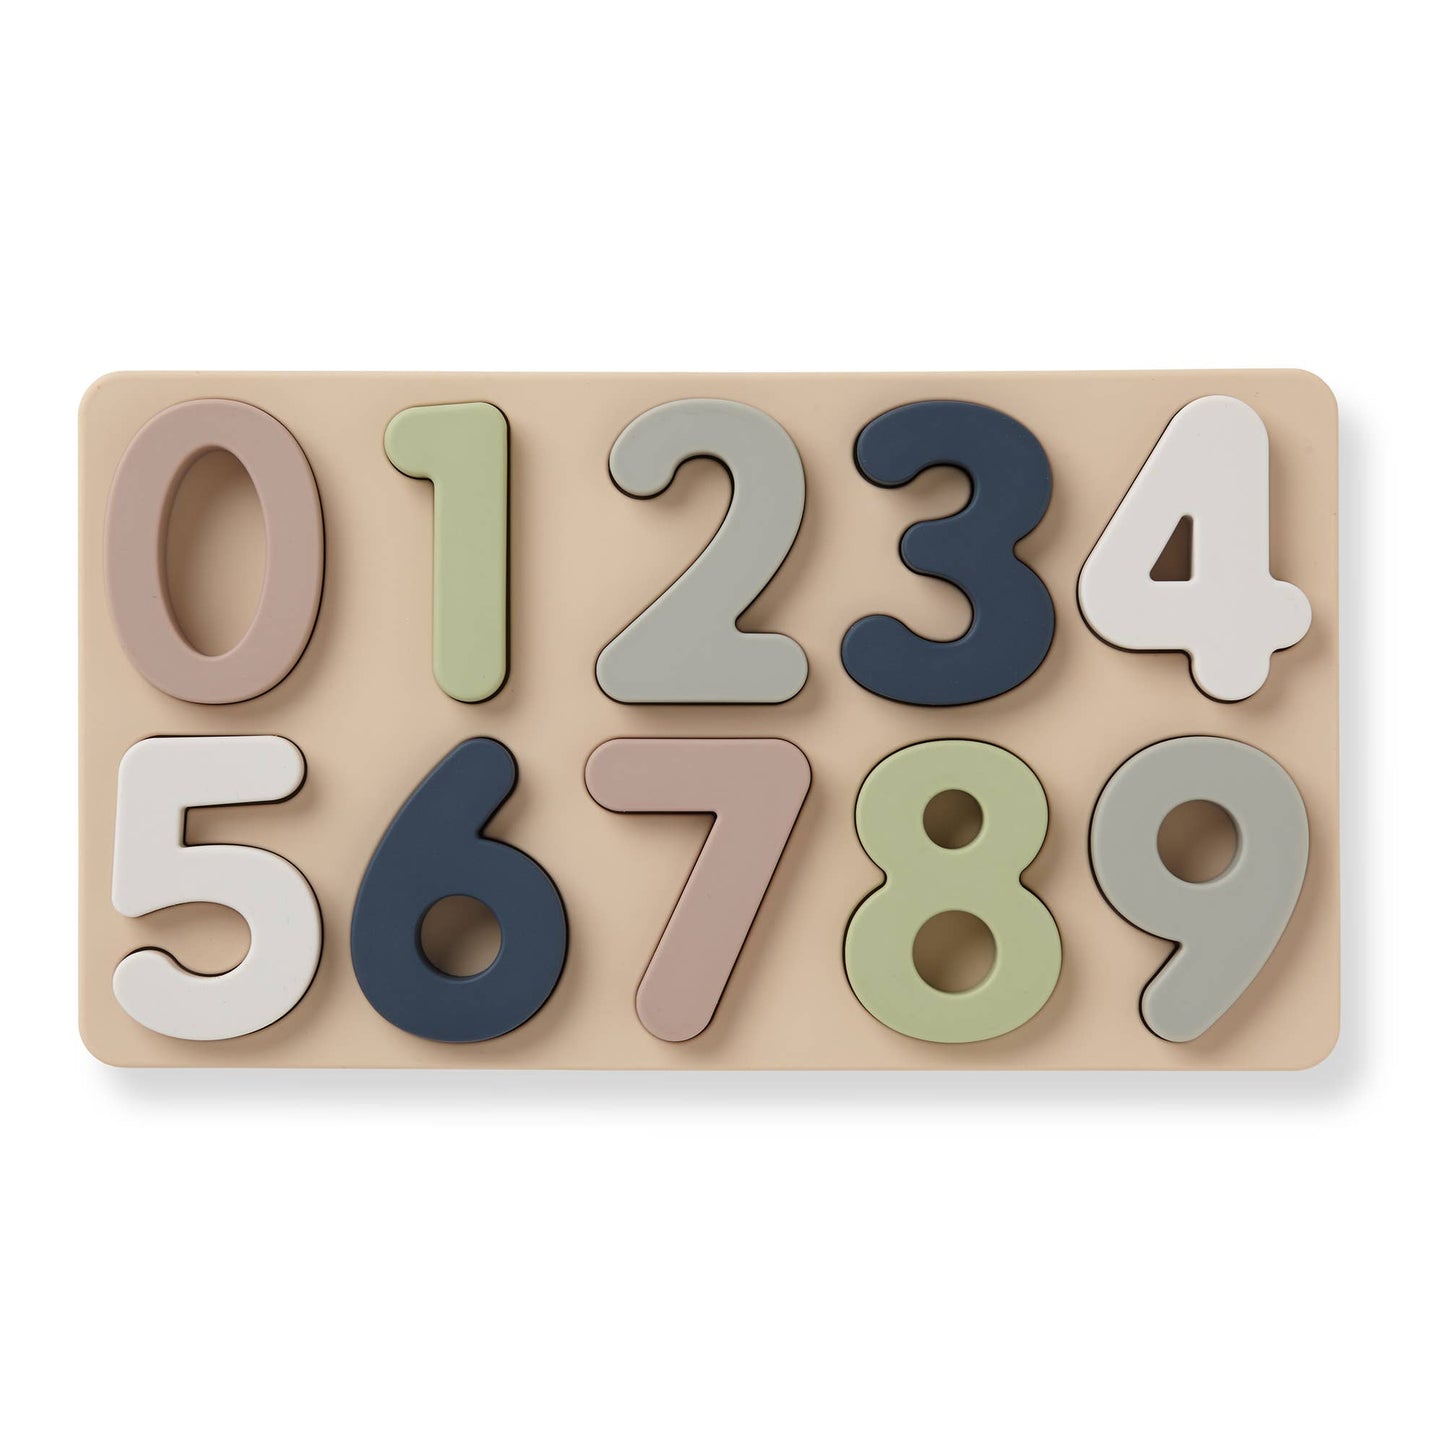 Ali+Oli - Large Soft Silicone Number Puzzle (11-pc) for Toddlers